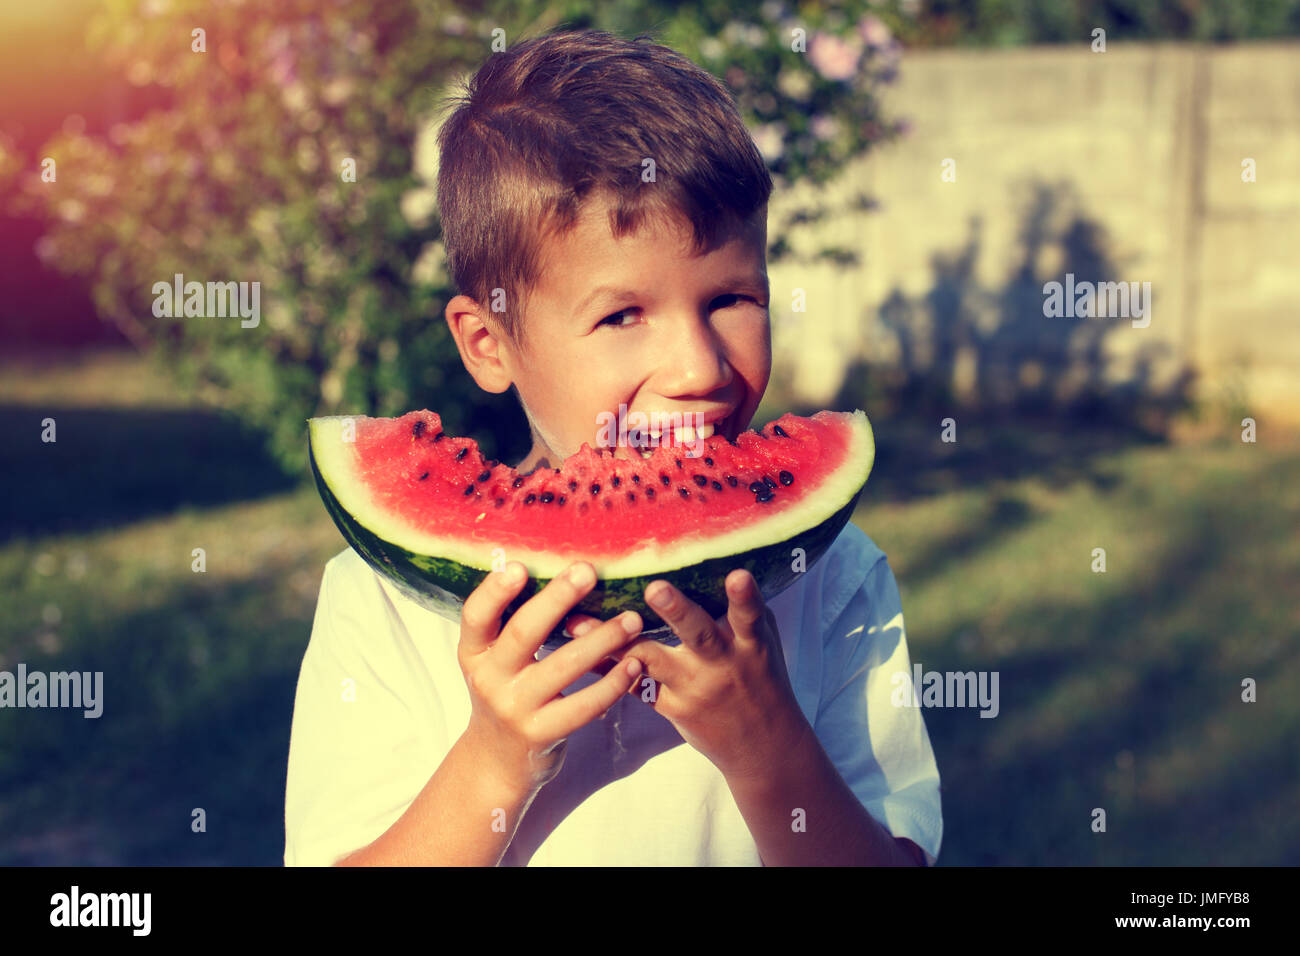 Little boy with smile bite into slice of watermelon outdoor Stock Photo